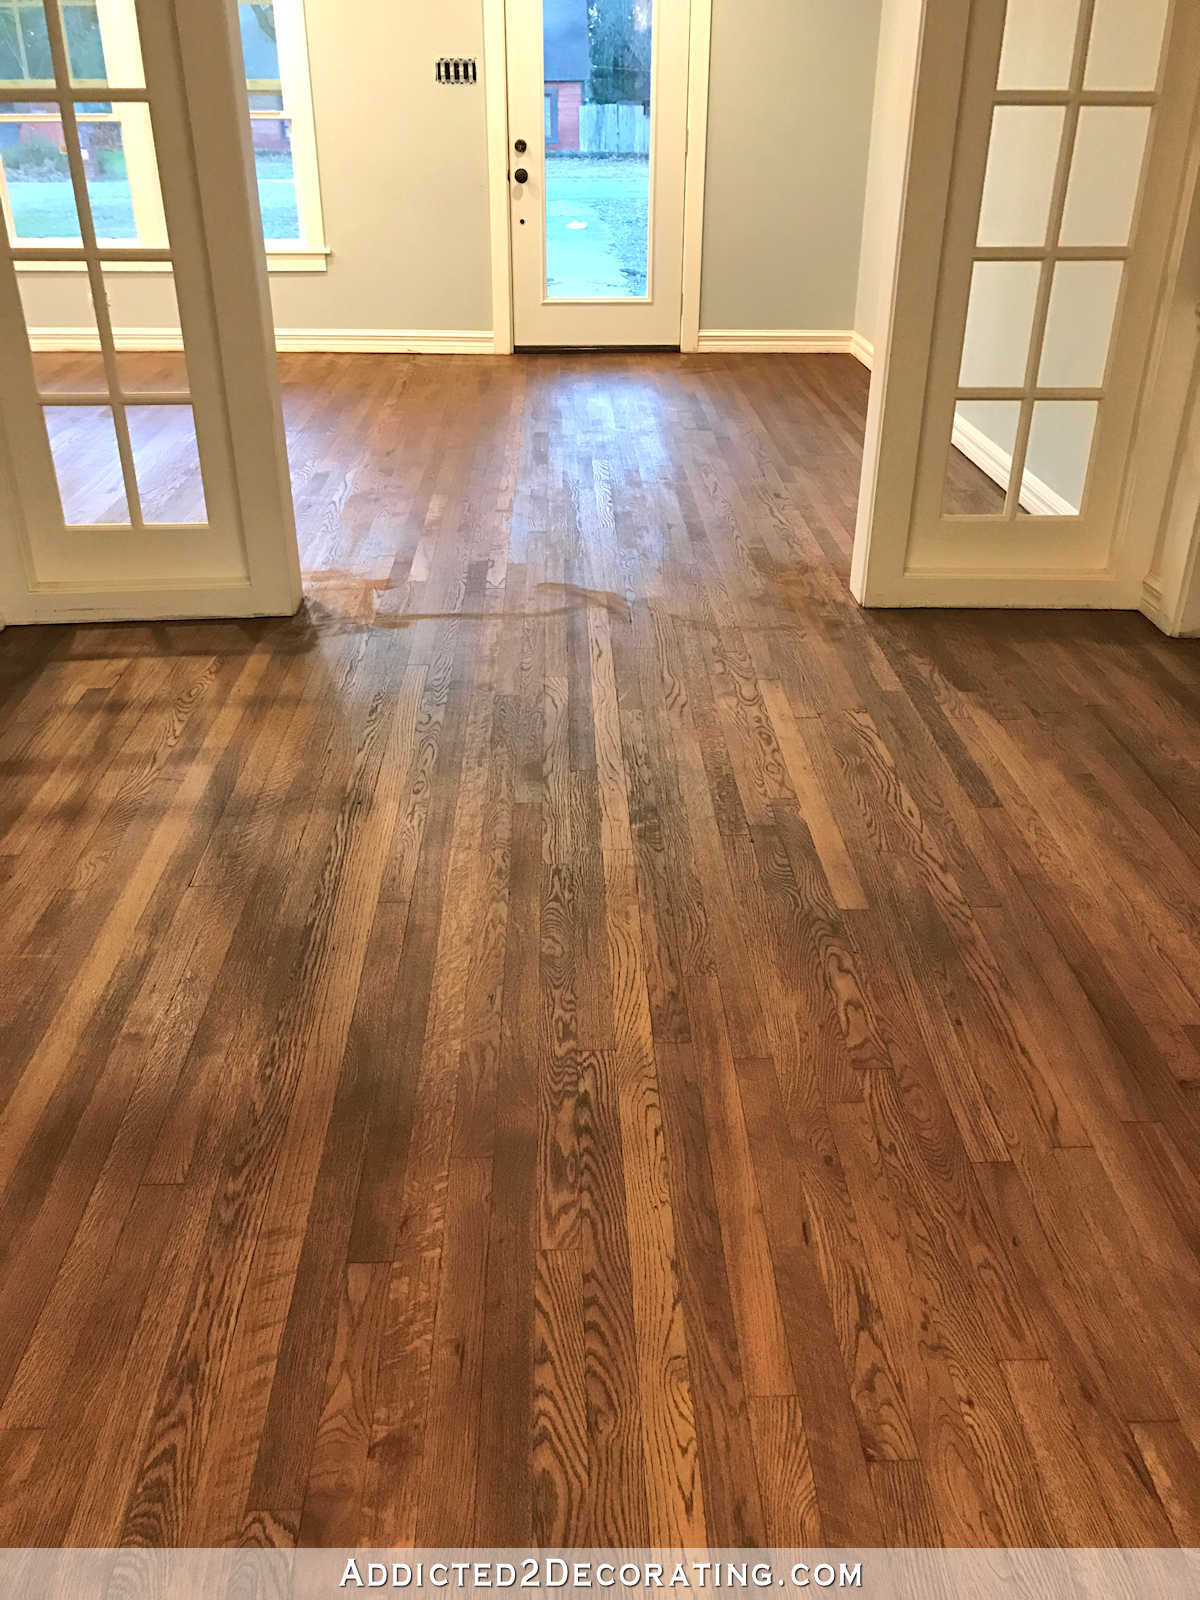 28 Popular Hardwood Floor Colors 2015 2024 free download hardwood floor colors 2015 of adventures in staining my red oak hardwood floors products process with regard to staining red oak hardwood floors 9 stain on entryway and music room floors